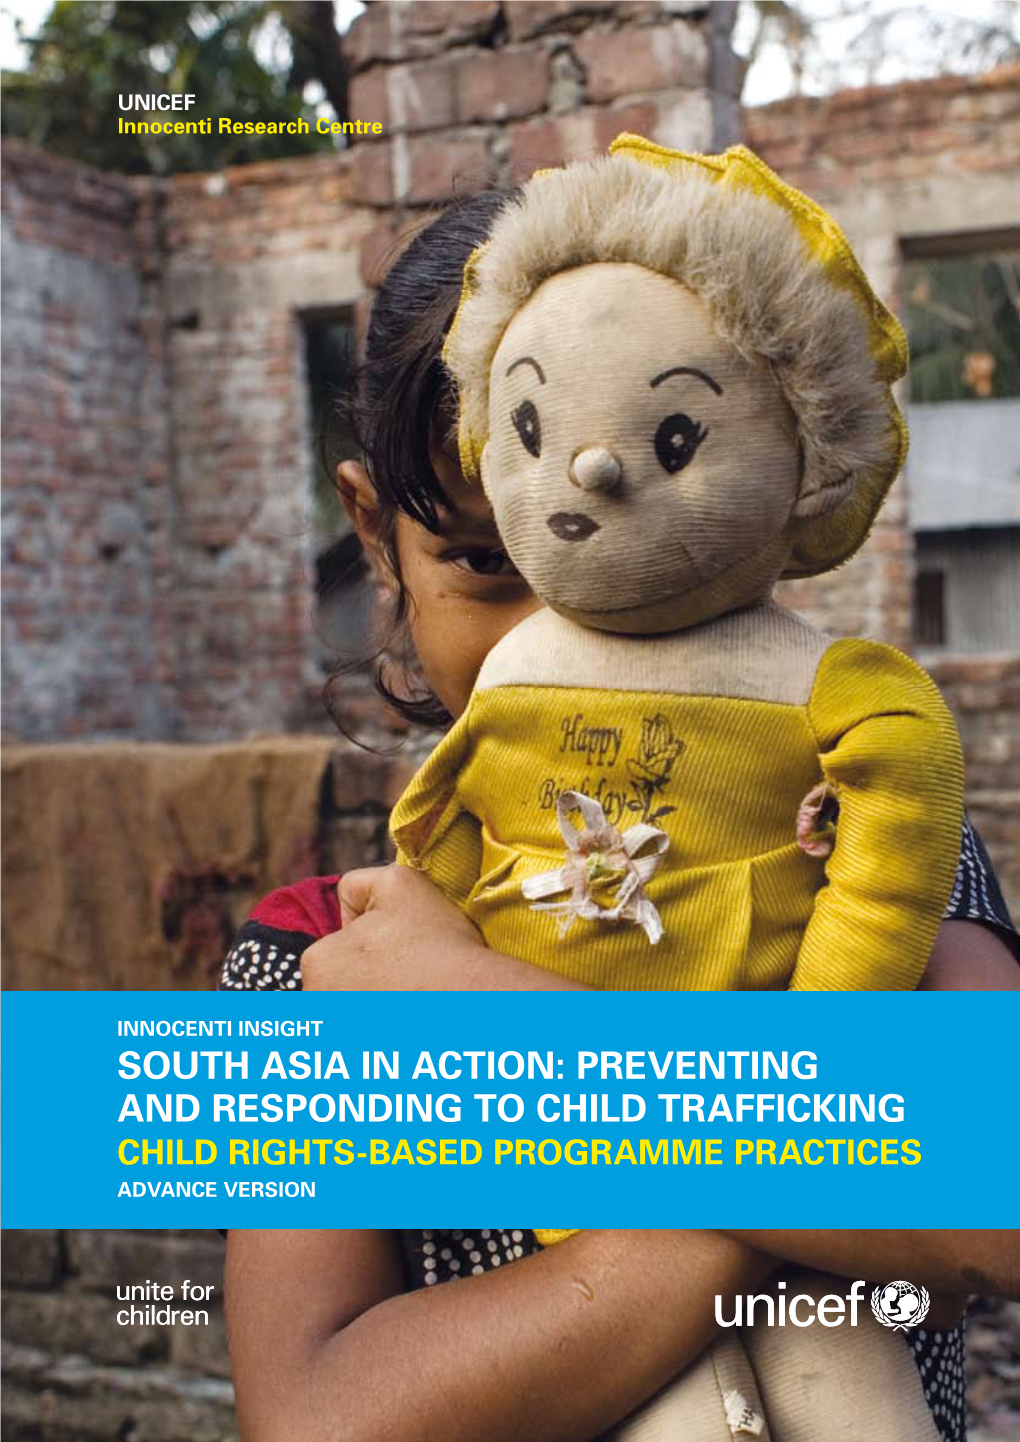 South Asia in Action: Preventing and Responding to Child Trafficking Child Rights-Based Programme Practices Advance Version